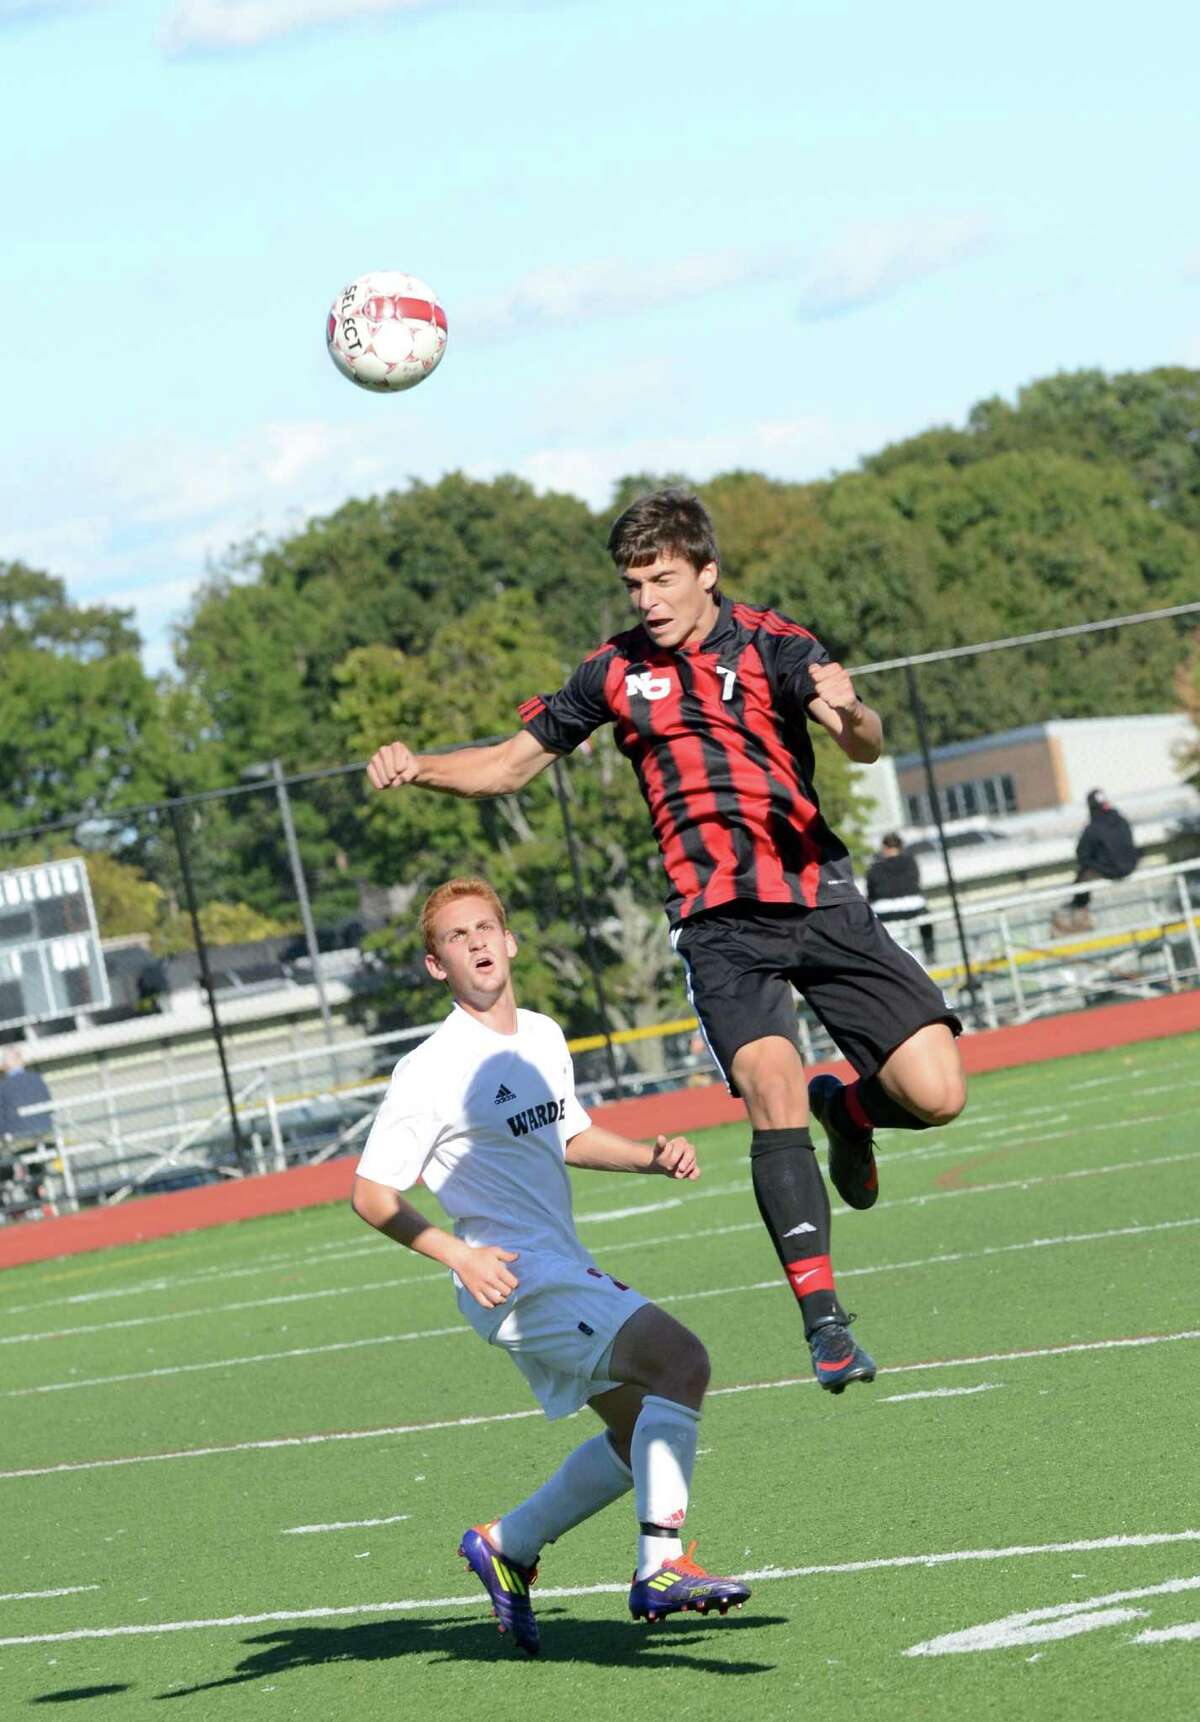 New Canaan's Robert Valente (7) goes up for a header as Warde's Alex Landau (27) defends during the boys soccer game at Tetreau/Davis field at Fairfield Warde High School on Monday, Sept. 24, 2012.